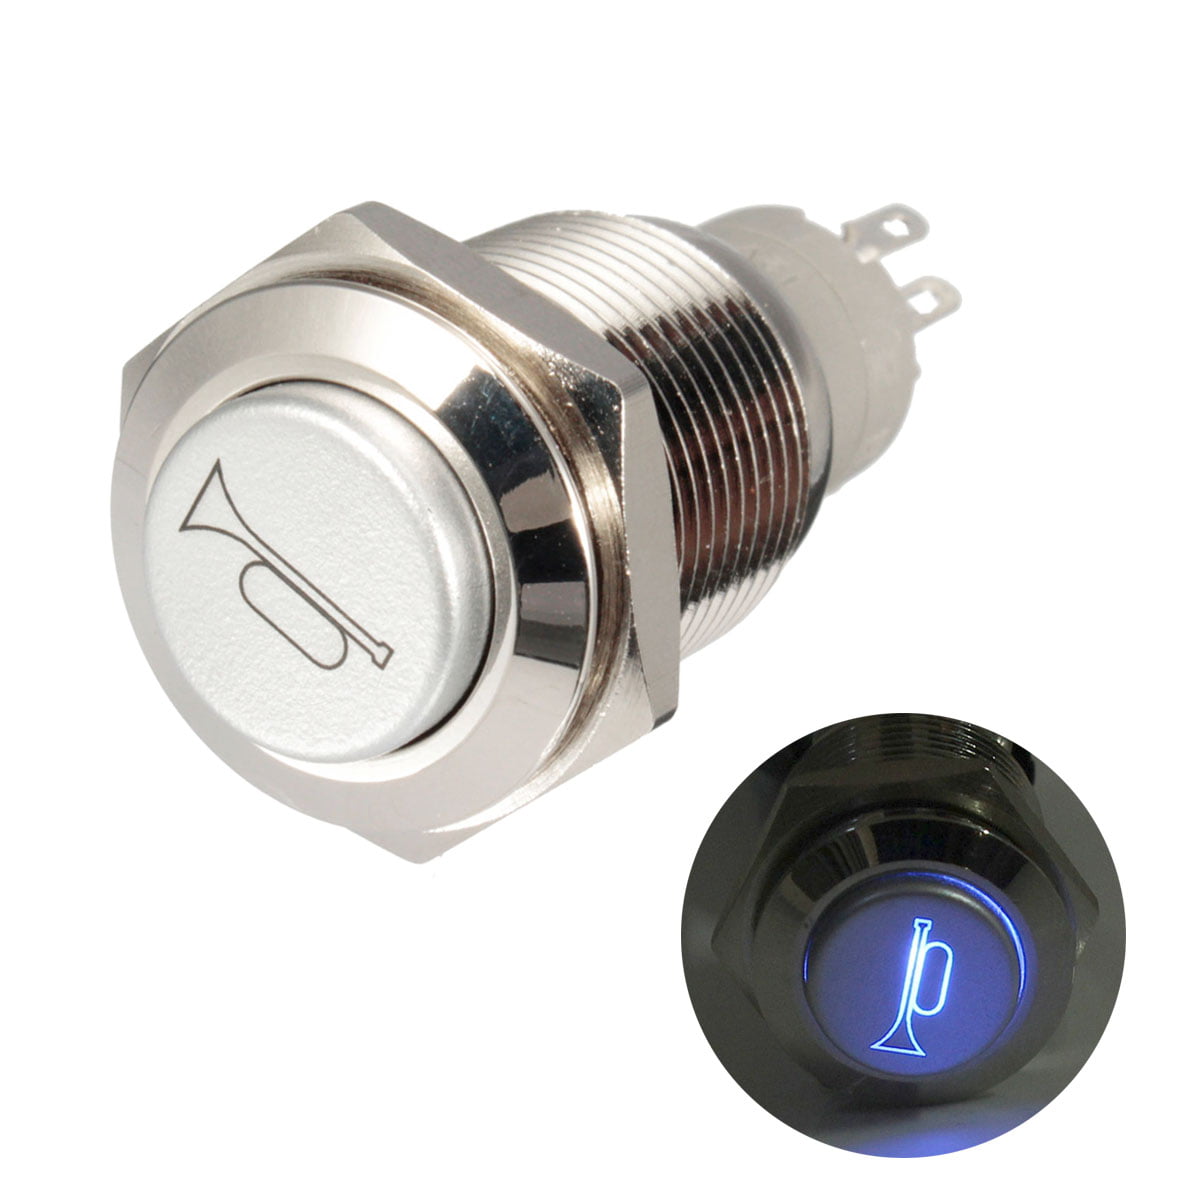 Details about  / SCI Waterproof Car Switch Push Button Engine Start Horn 12V 16A For Boat US